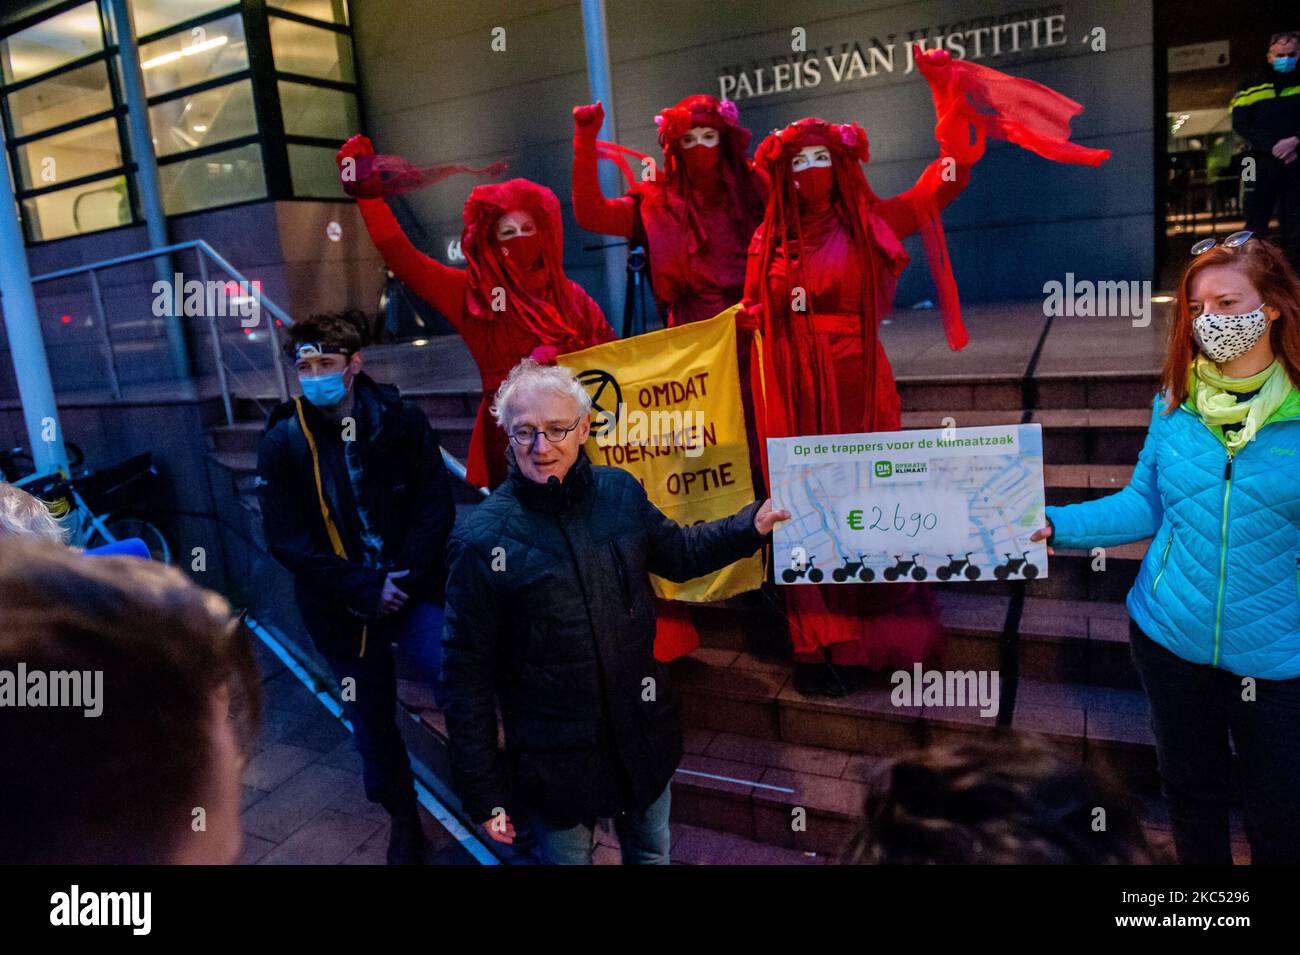 December 1st, The Hague. From Tuesday 1 December, Milieudefensie (Friends of the Earth Netherlands) will face Shell in court. The plaintiffs want Shell to take a more sustainable course. The full legal costs of €500,000 are covered by donations. The Red Rebels from Extinction Rebellion, and a group of climate activists that have been cycling from the North of the country in stages to draw attention to the climate case, delivered in front of the courts the donation check to the lawyer Roger Cox and his team. (Photo by Romy Arroyo Fernandez/NurPhoto) Stock Photo